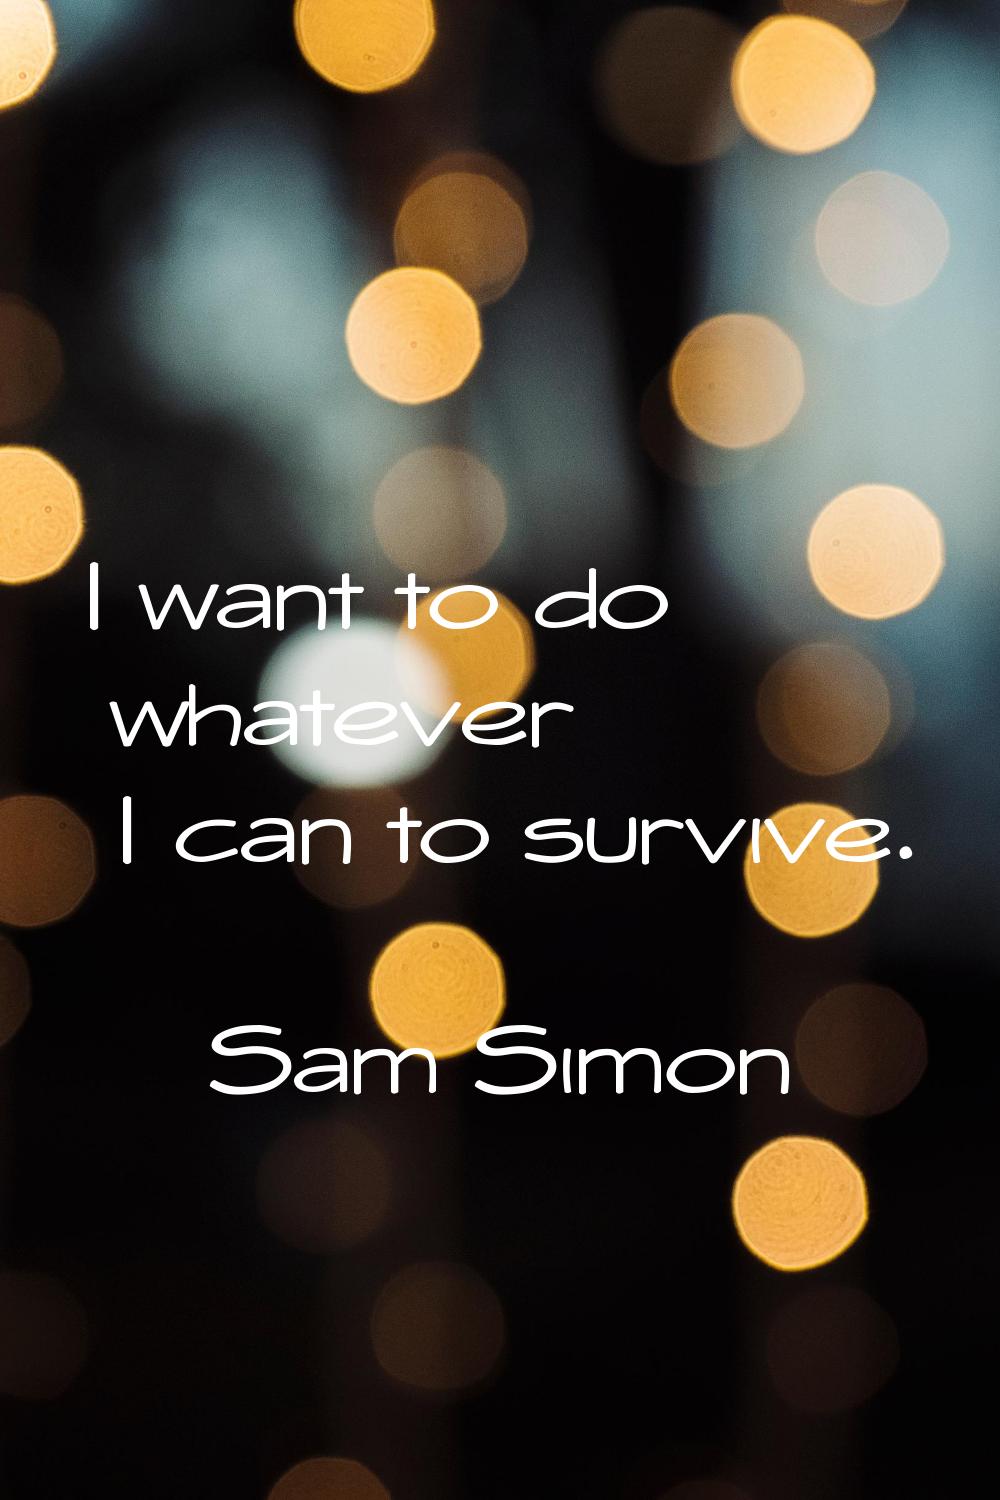 I want to do whatever I can to survive.